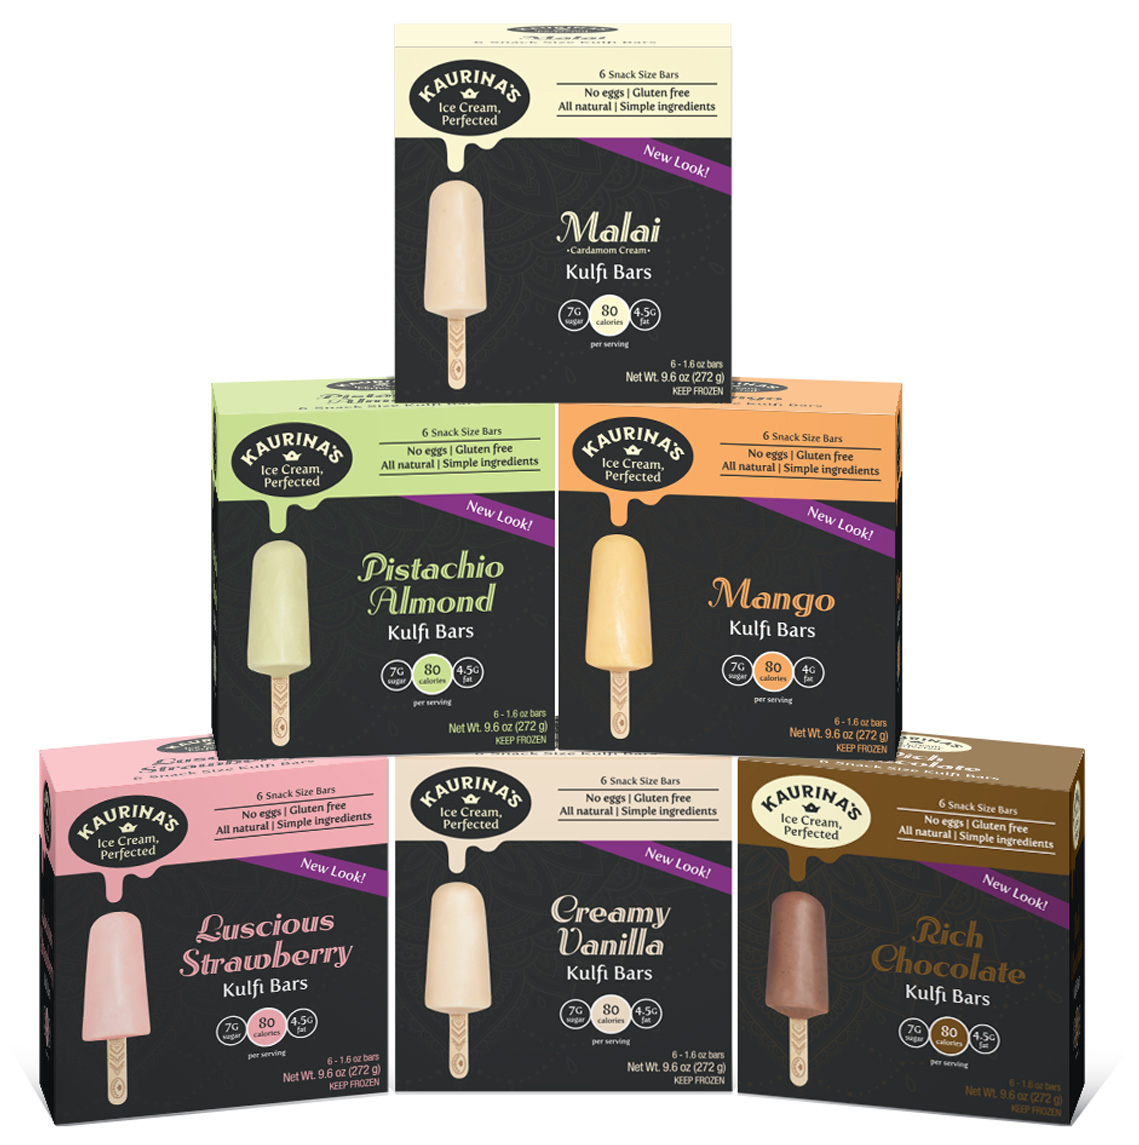 Pyramid of six pack of snack size bars for malai, pistachio almond, mango, strawberry, vanilla and chocolate